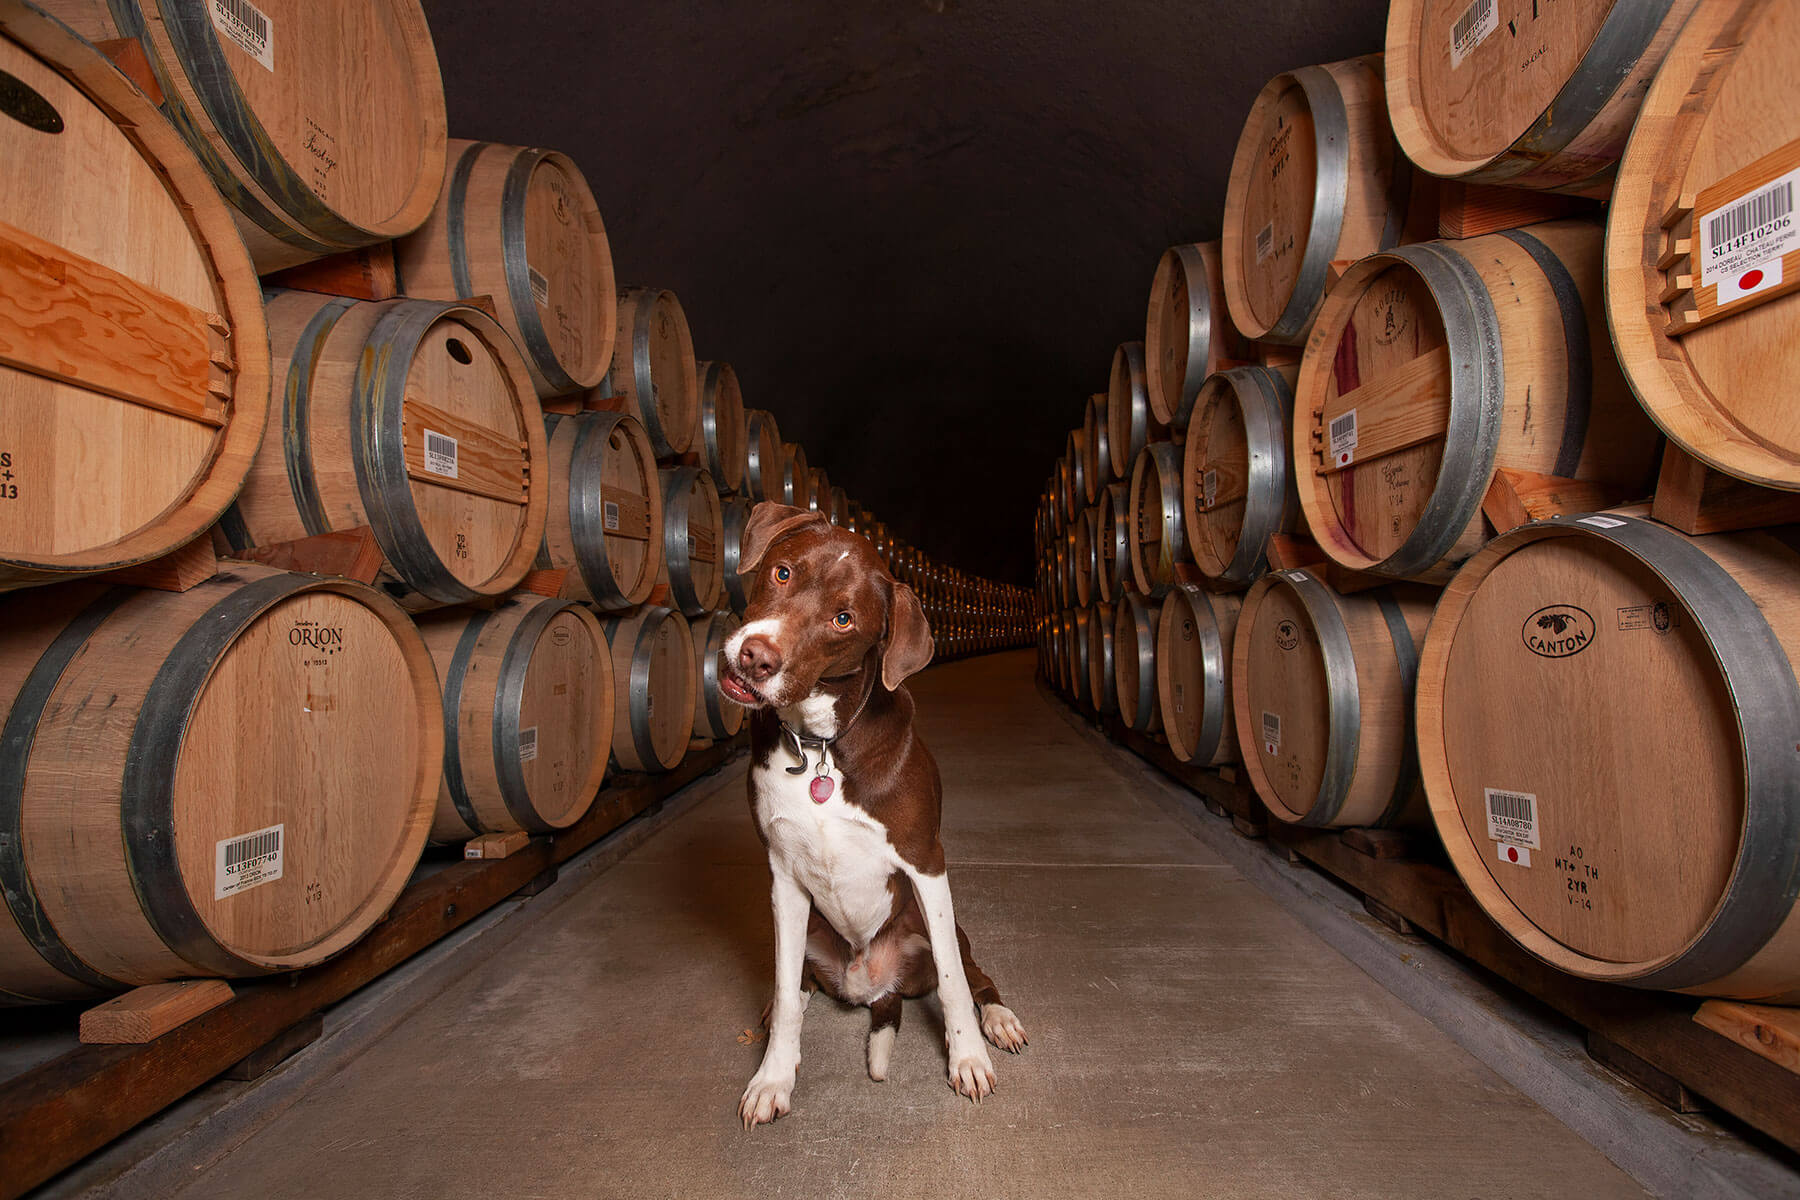 Dog in wine cellar in Napa business brand photos for dog-friendly winery.